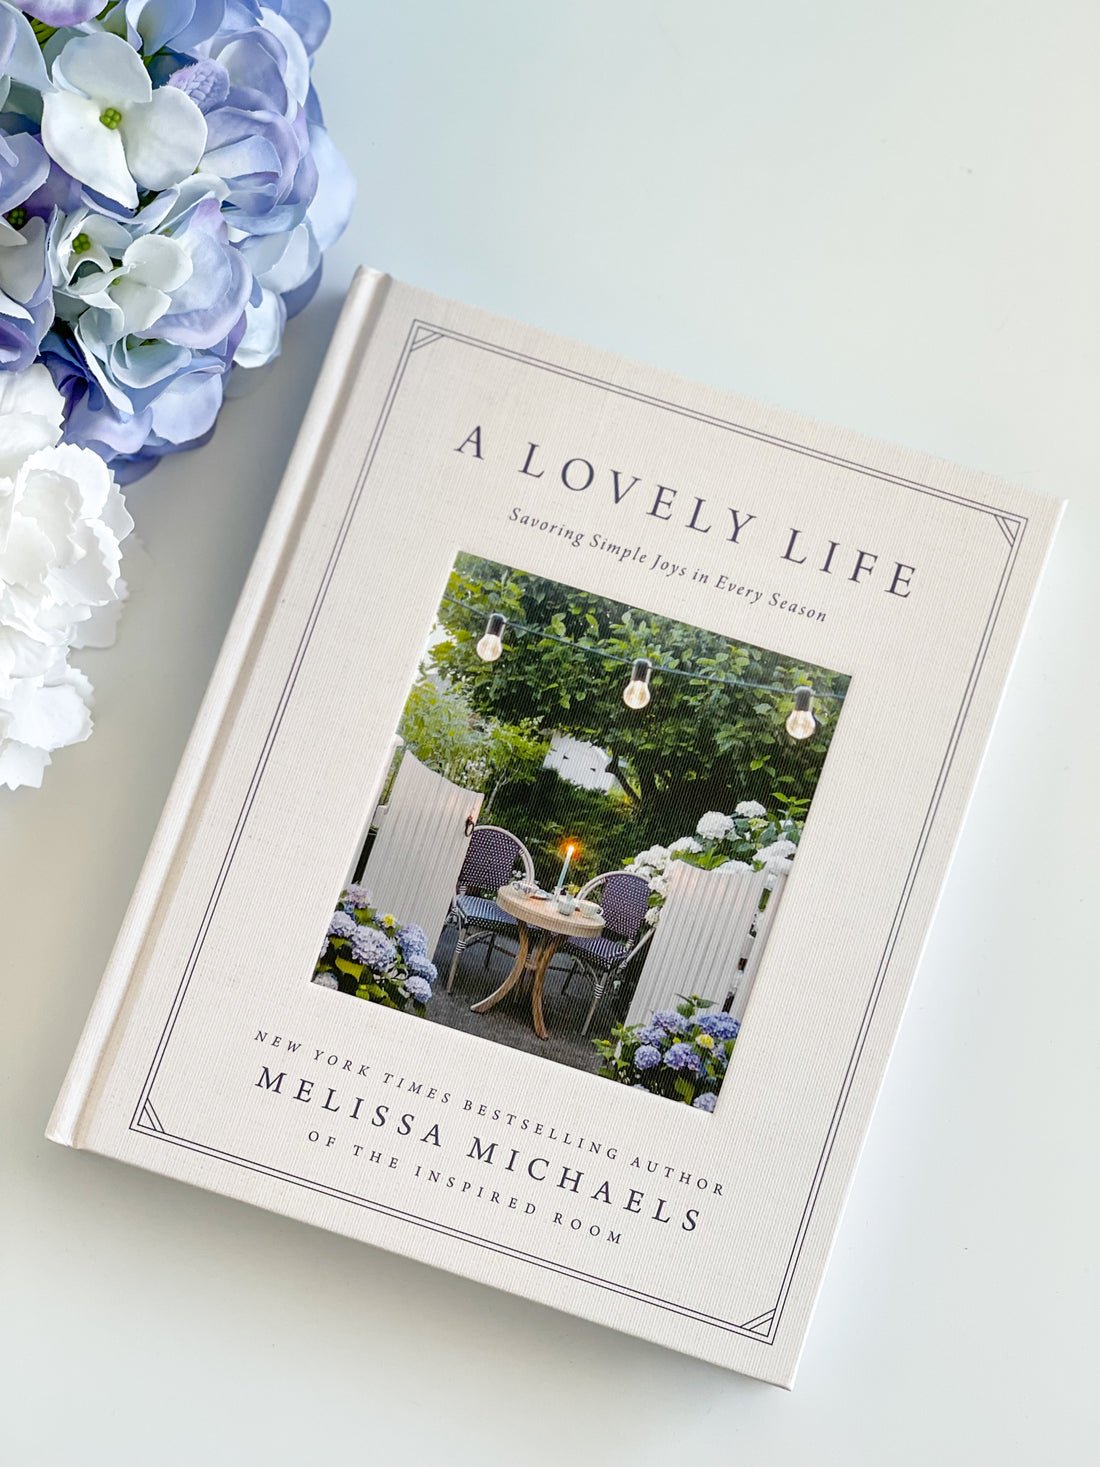 A Lovely Life Book